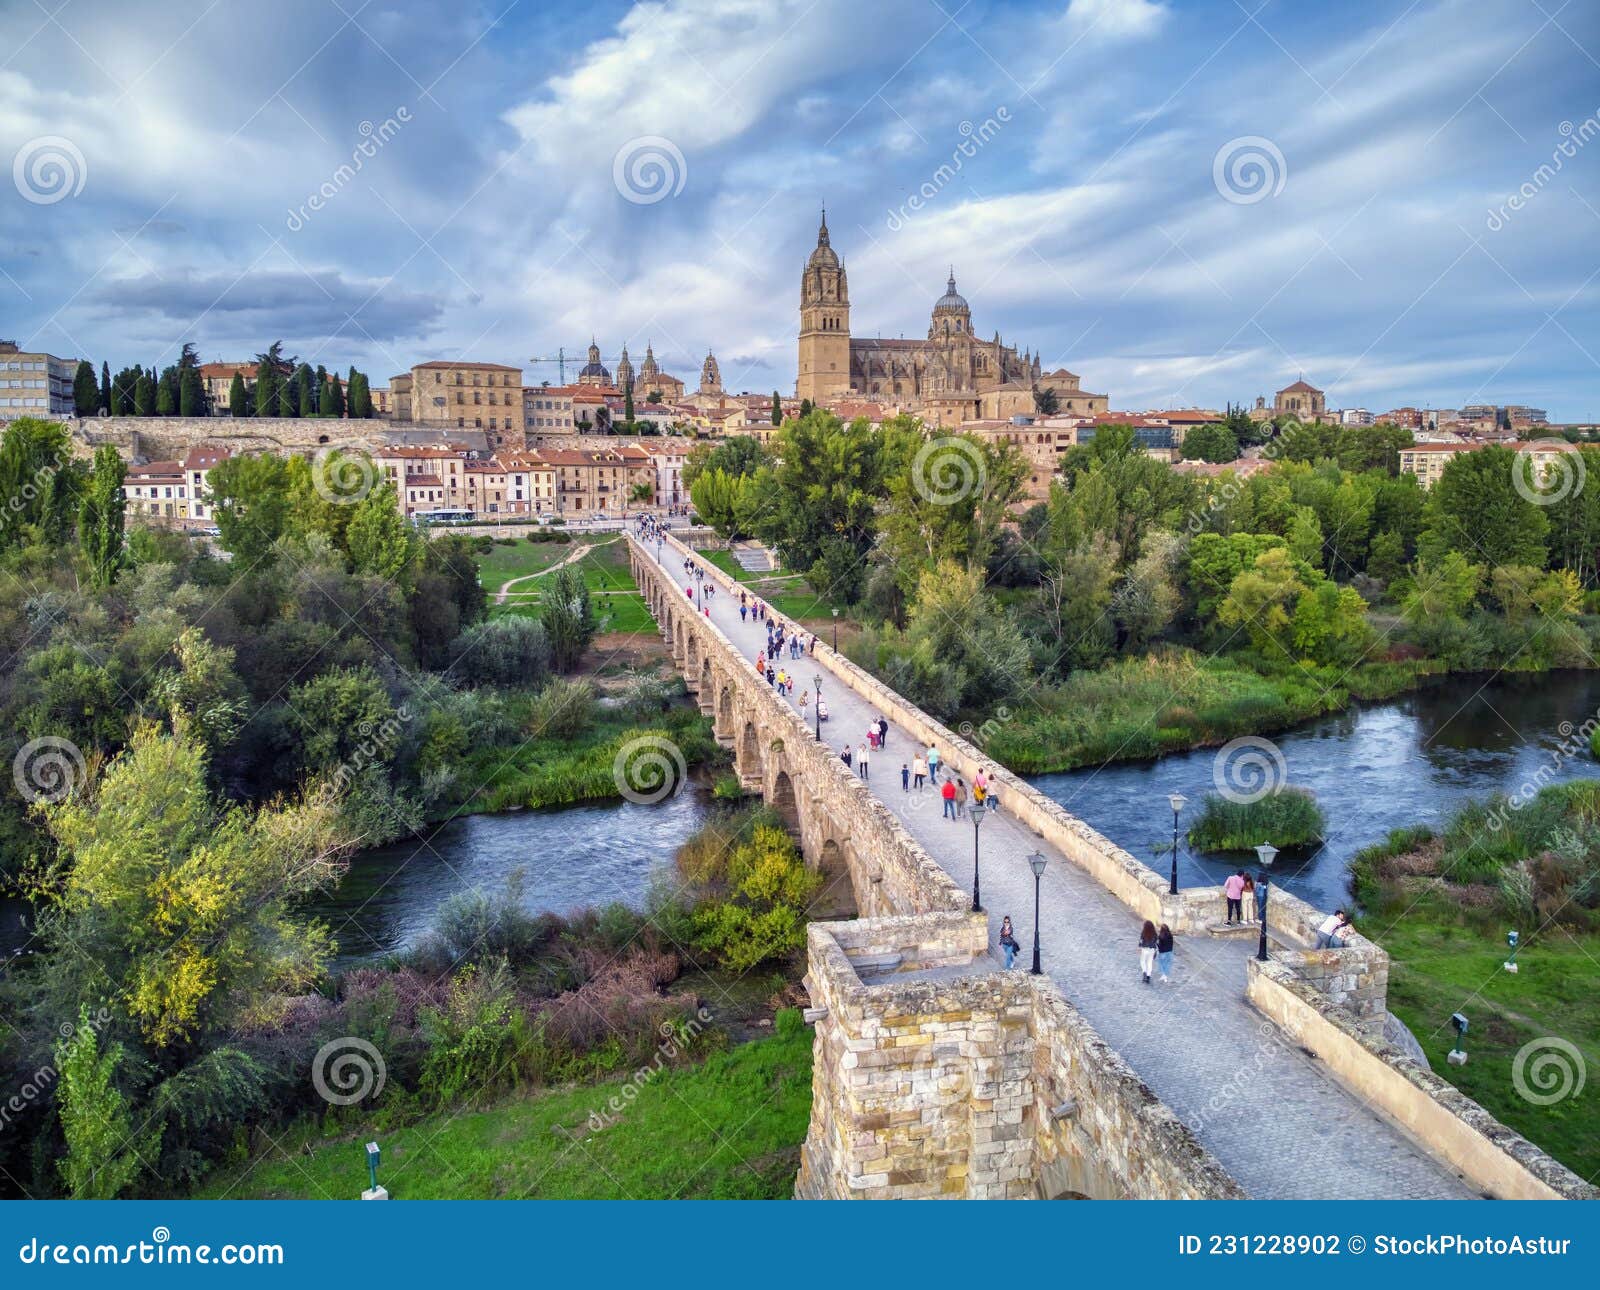 aerial view of salamanca with the cathedral and the roman bridge